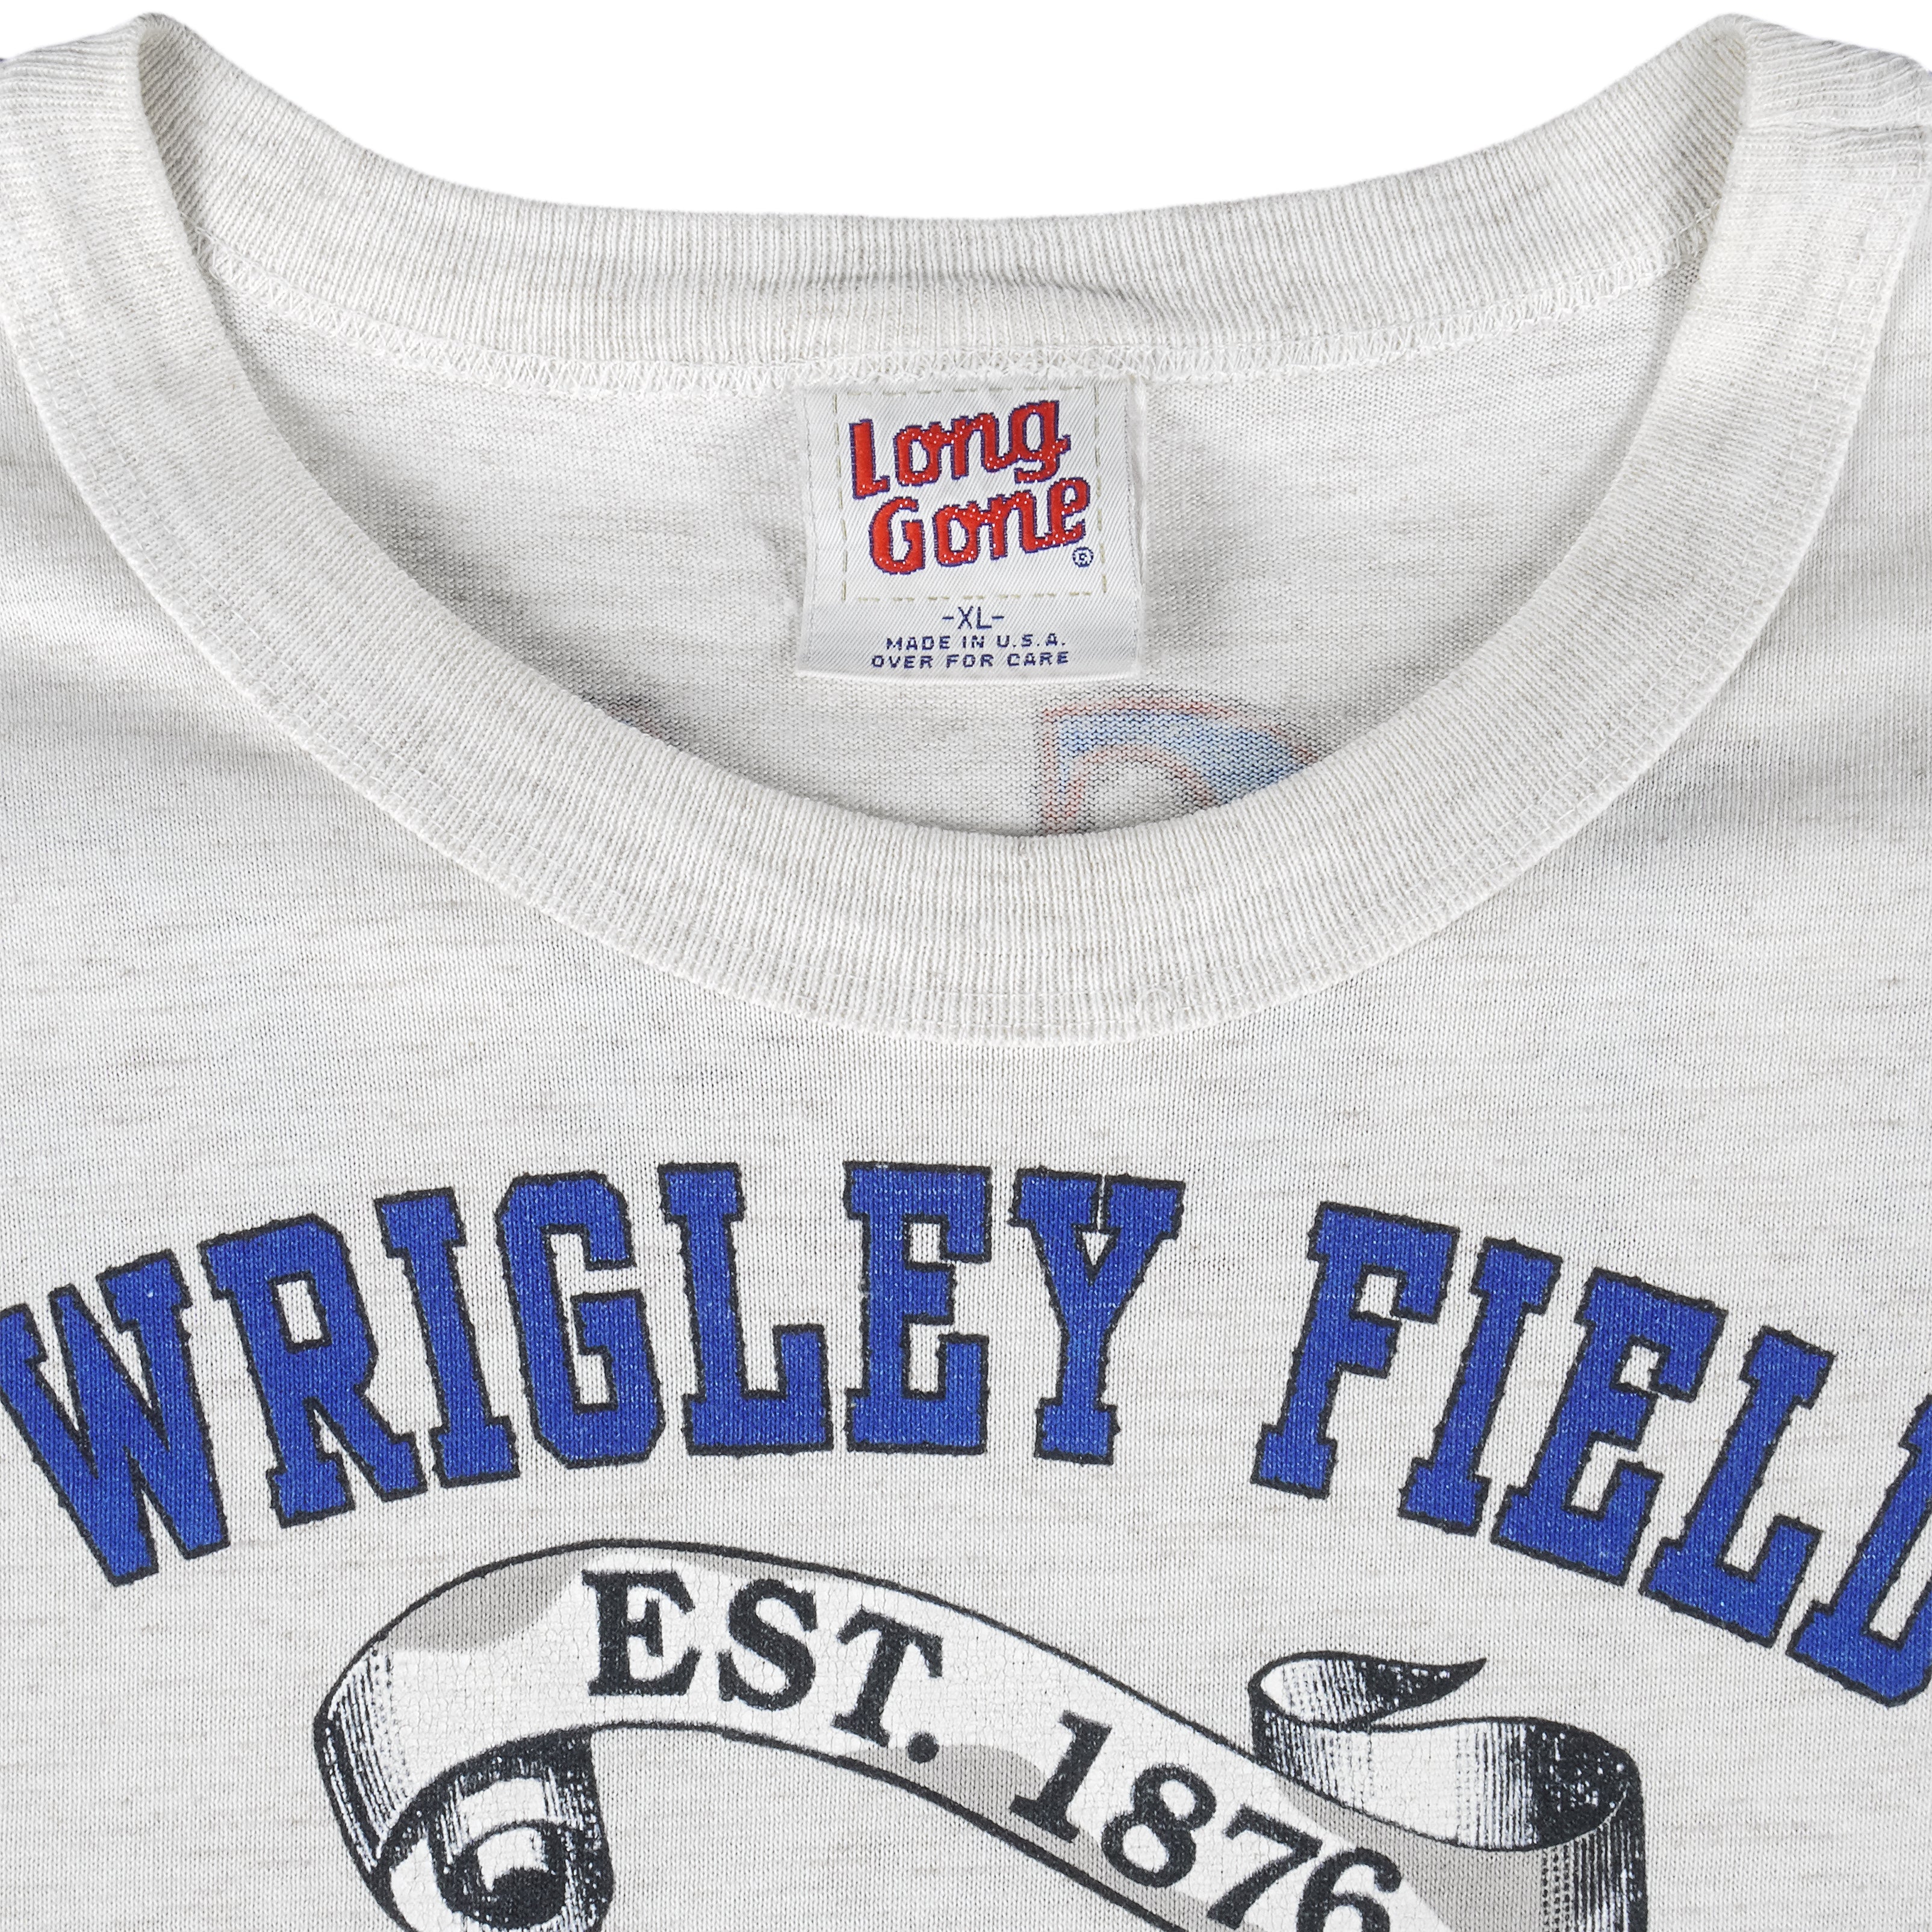 L) Vintage Single Stitched Chicago Cubs All Over Print T Shirt